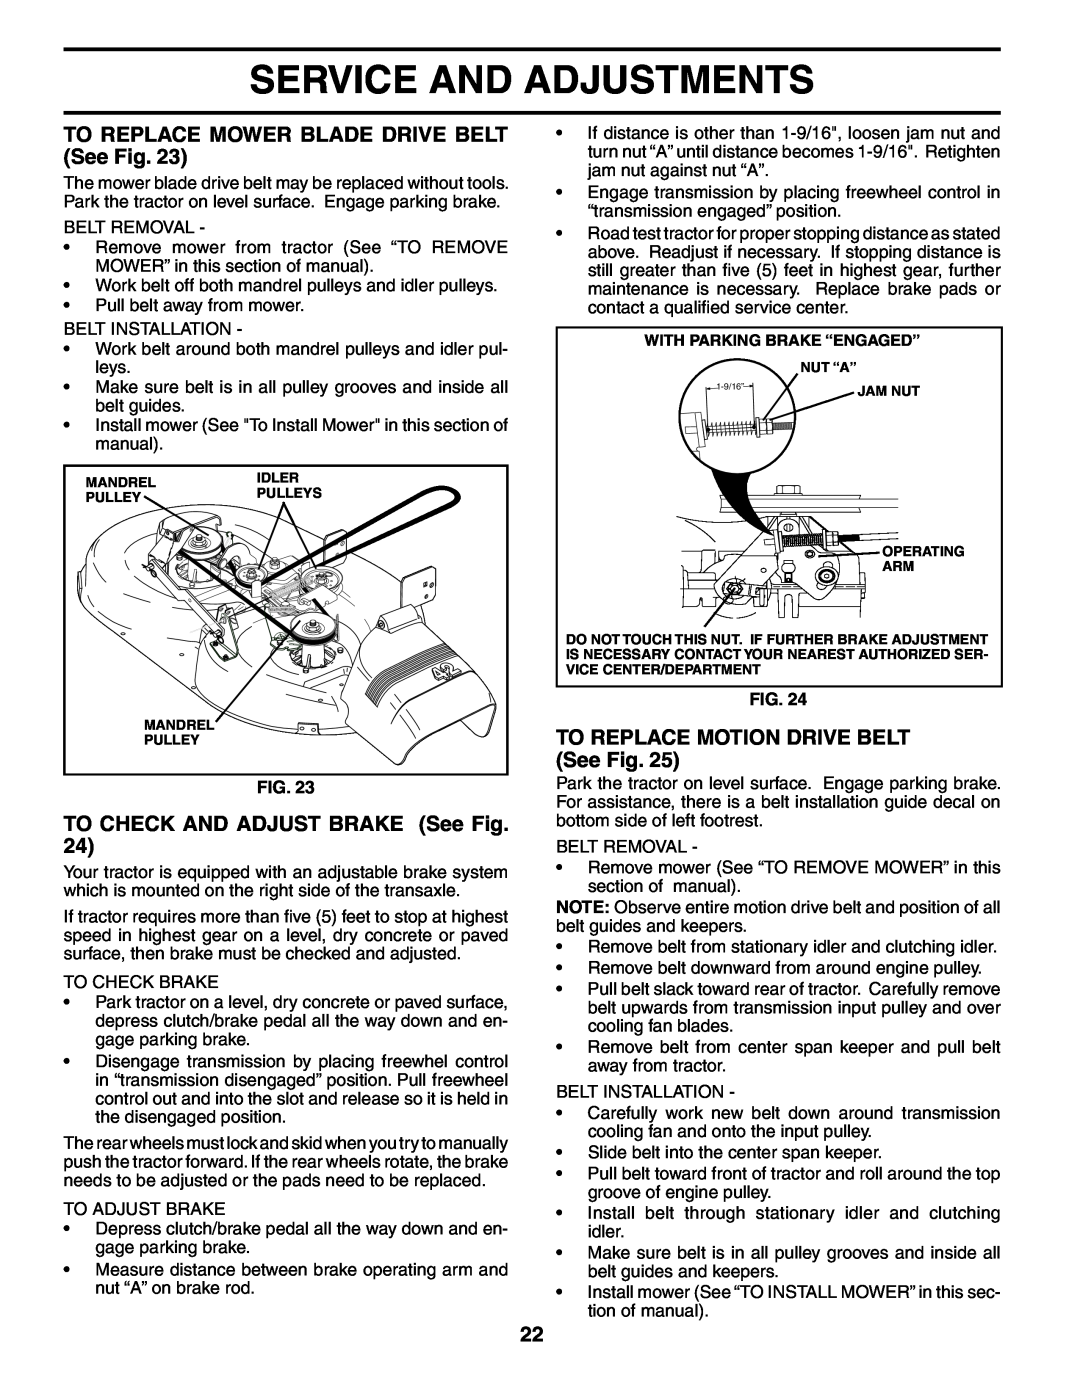 Poulan 184617 TO REPLACE MOWER BLADE DRIVE BELT See Fig, TO CHECK AND ADJUST BRAKE See Fig, Service And Adjustments 